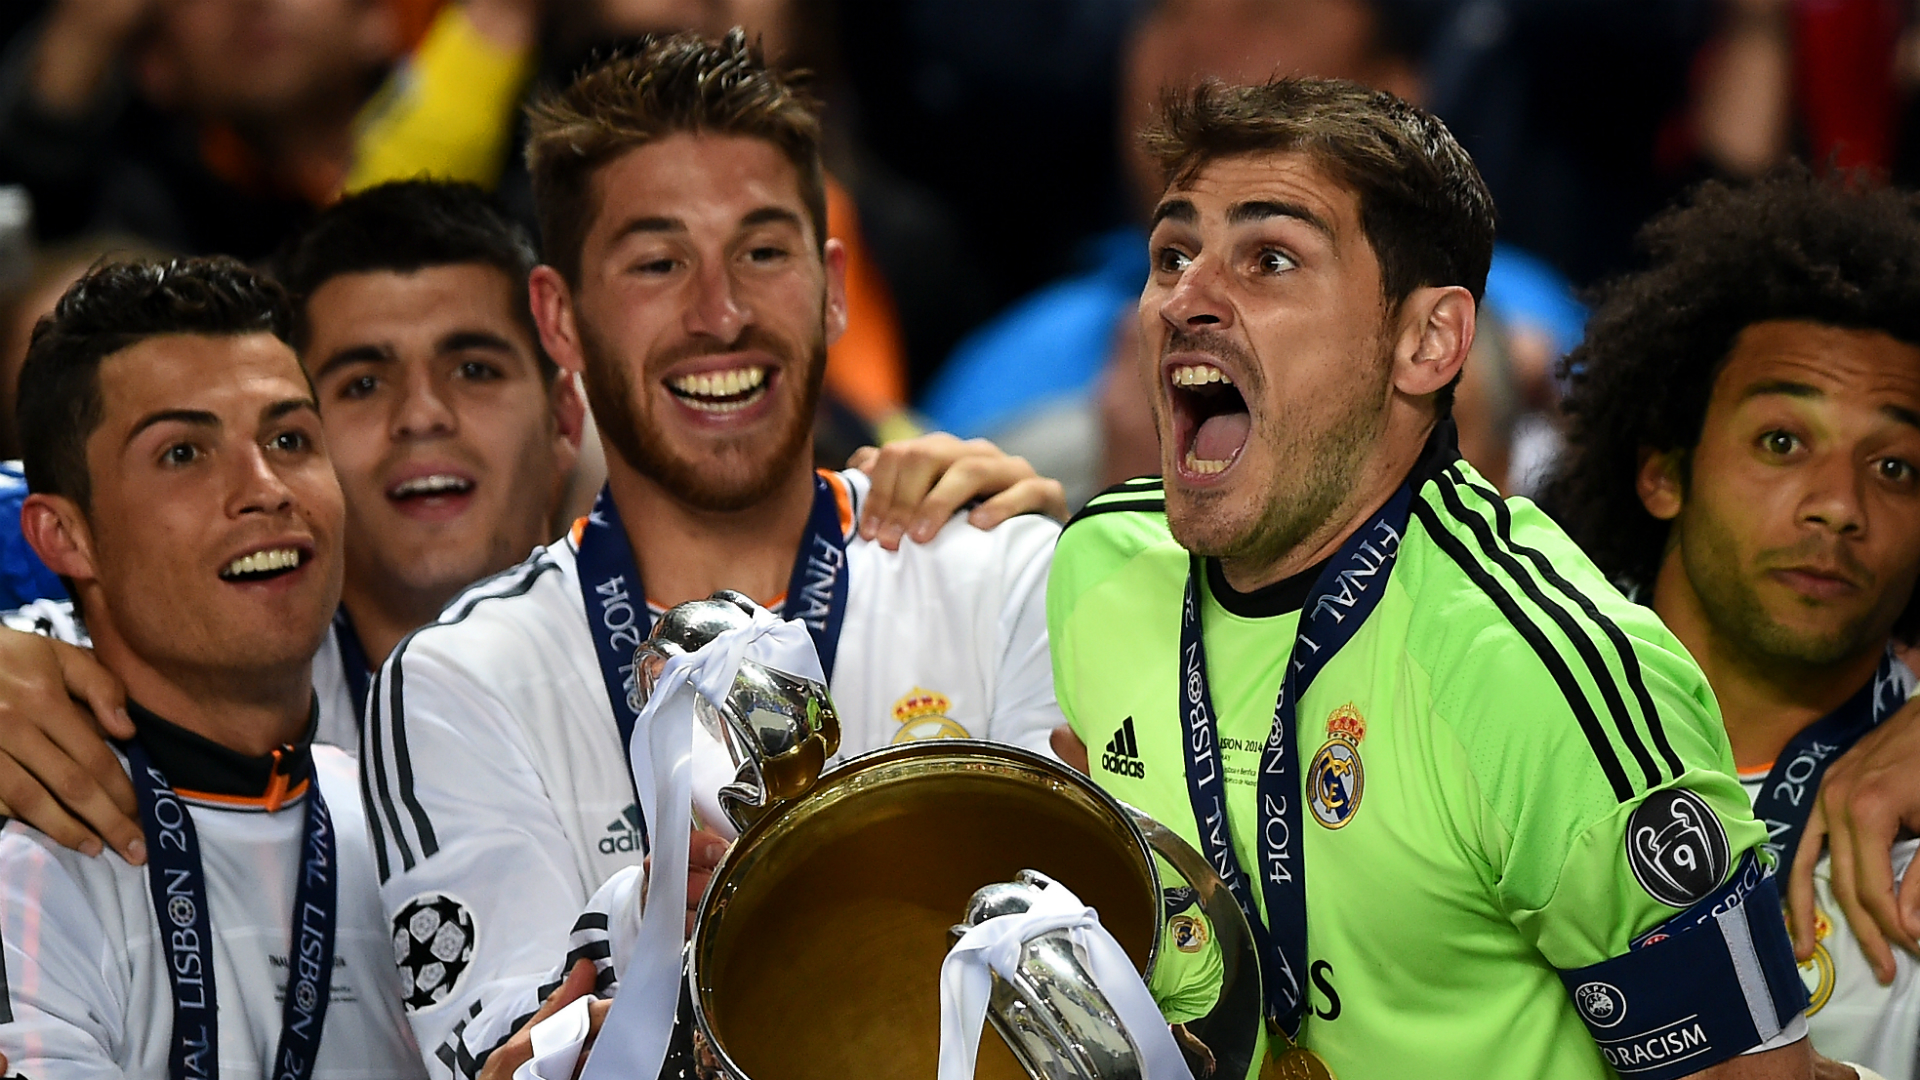 Iker Casillas retires as a Real Madrid and Spain "legend" with big-name former team-mates paying tribute to the goalkeeping great.